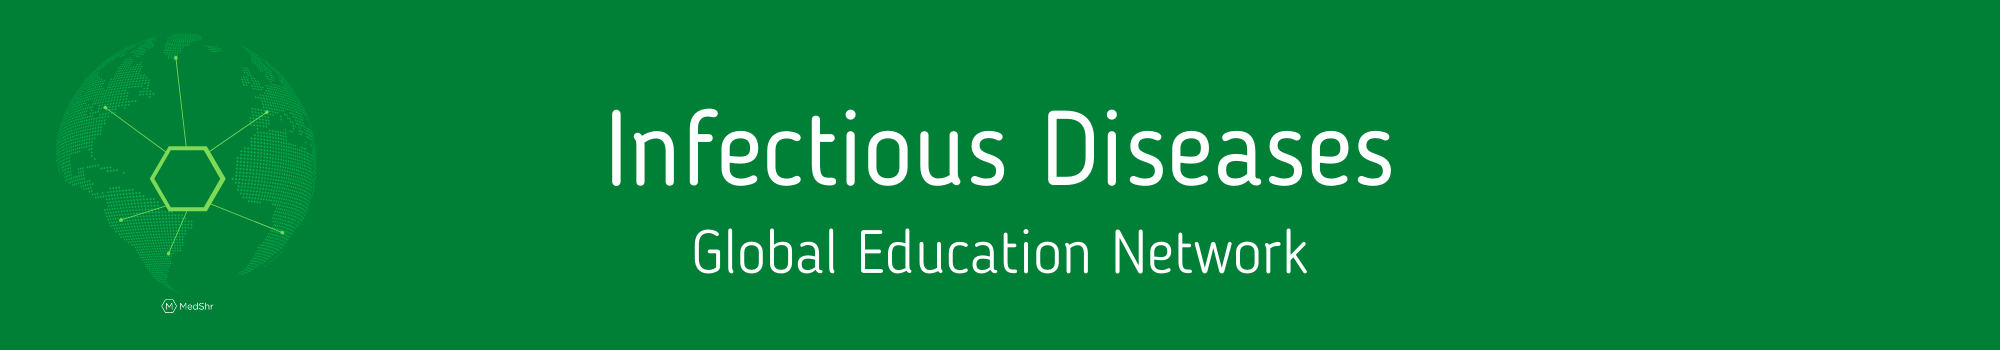 If you’re a doctor or HCP, you can join MedShr’s Infectious Diseases Global Education Network (medshr.it/infectiousdiseases) for free to learn more about leprosy and share and discuss your own experiences. MedShr also offers free, fast-tracked, registration for medical schools, hospitals, and medical societies. This includes providing private groups for HCPs. Please contact globalhealth@medshr.net to find out more and to make arrangements. You can find out more about leprosy here or read further information below.